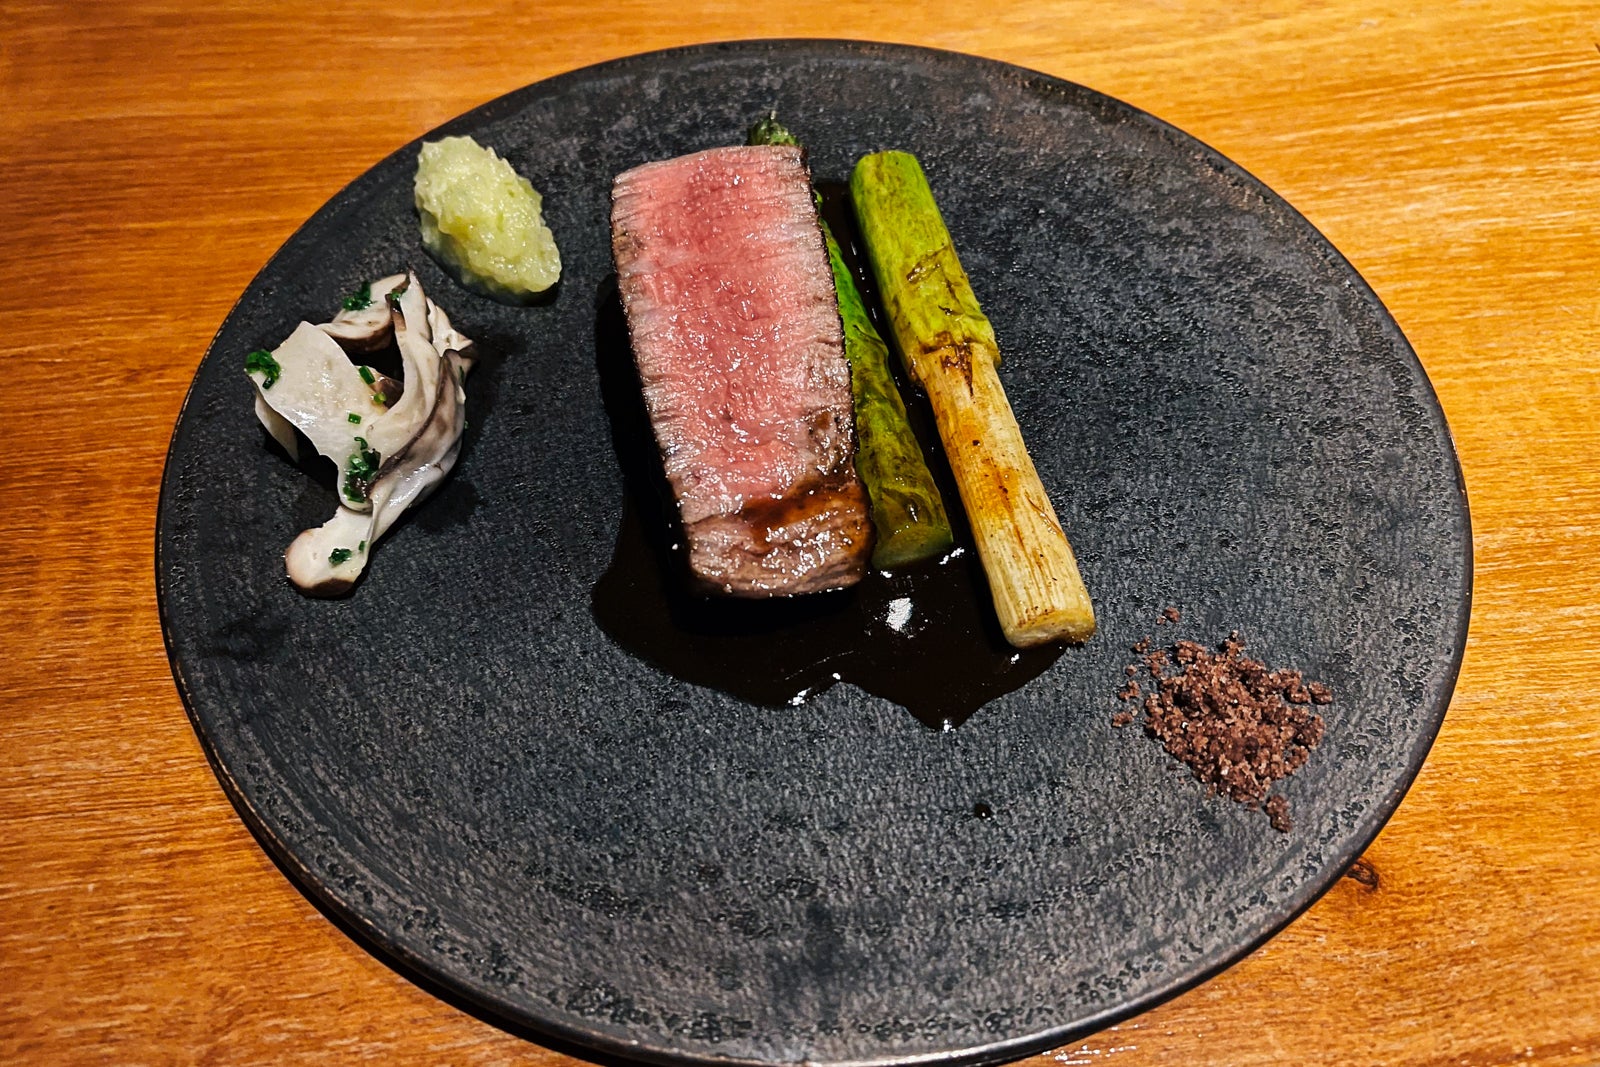 Wagyu beef tenderloin with granny smith apple and wasabi